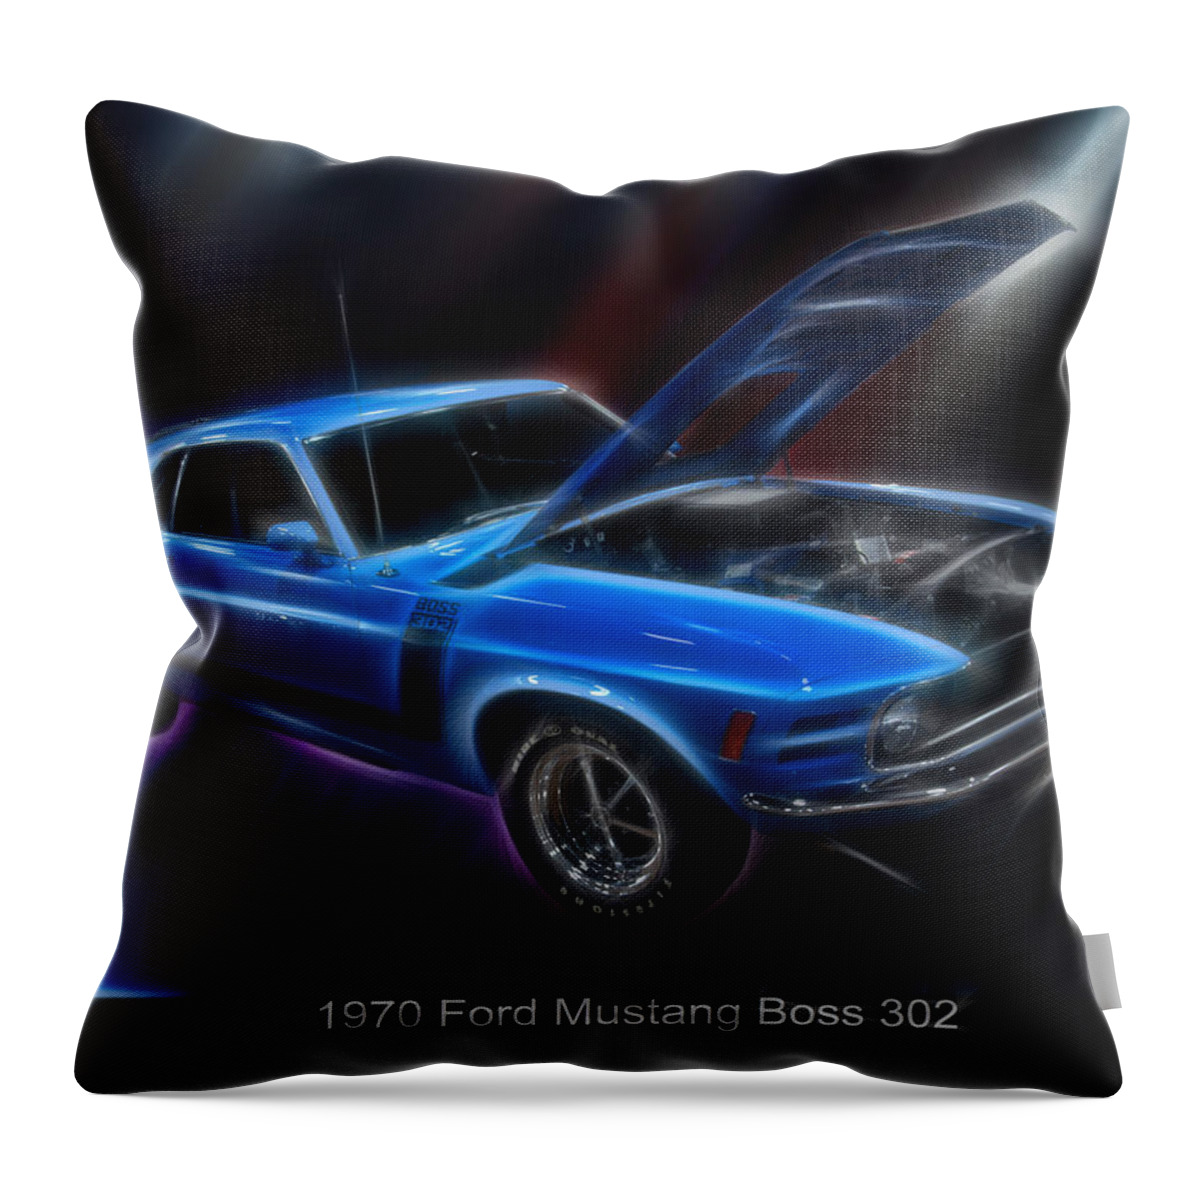 Electric Images Throw Pillow featuring the digital art 1970 Ford Mustang Boss 302 Electric by Flees Photos